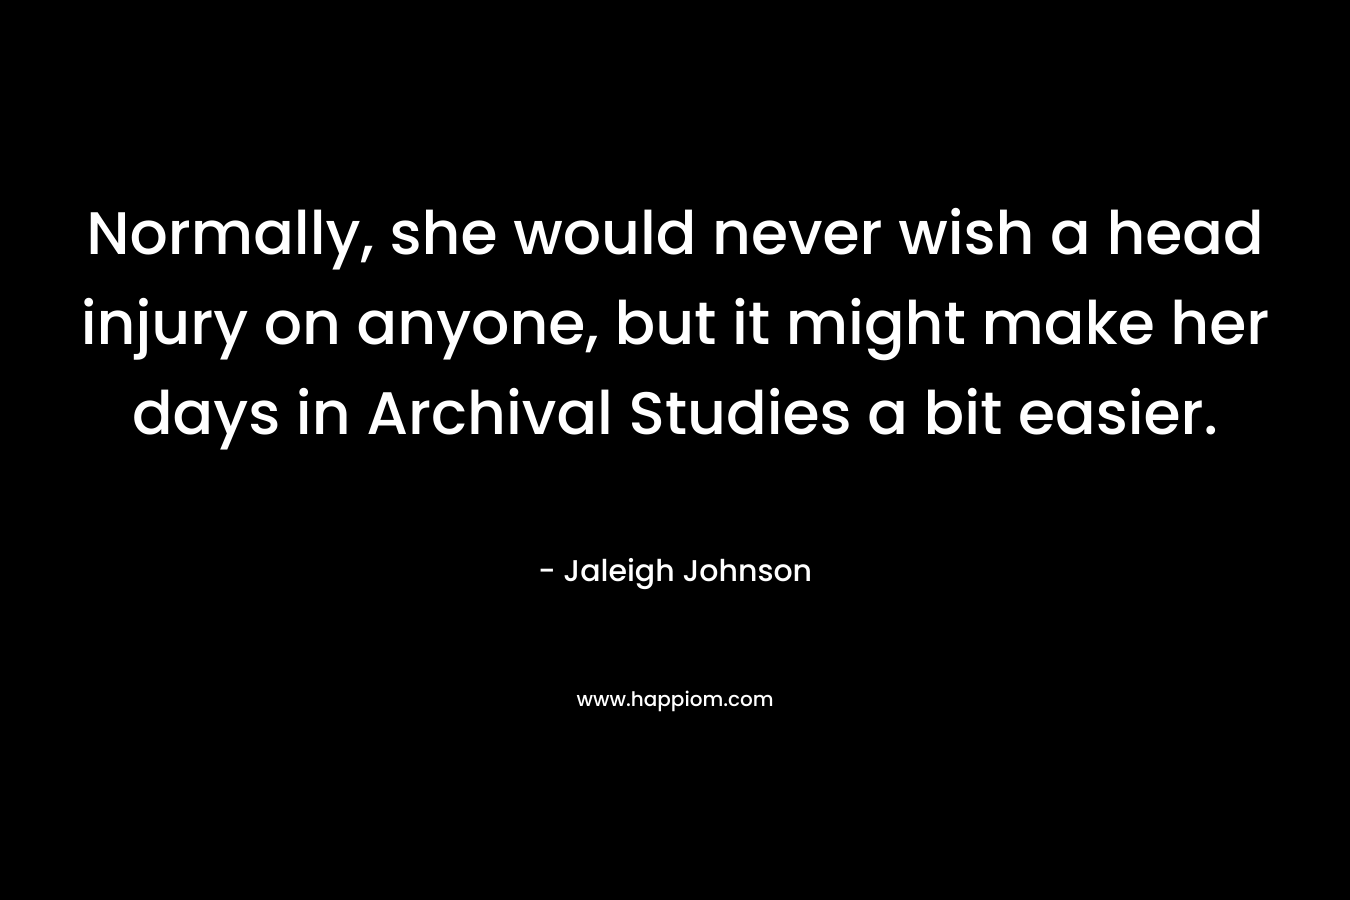 Normally, she would never wish a head injury on anyone, but it might make her days in Archival Studies a bit easier.